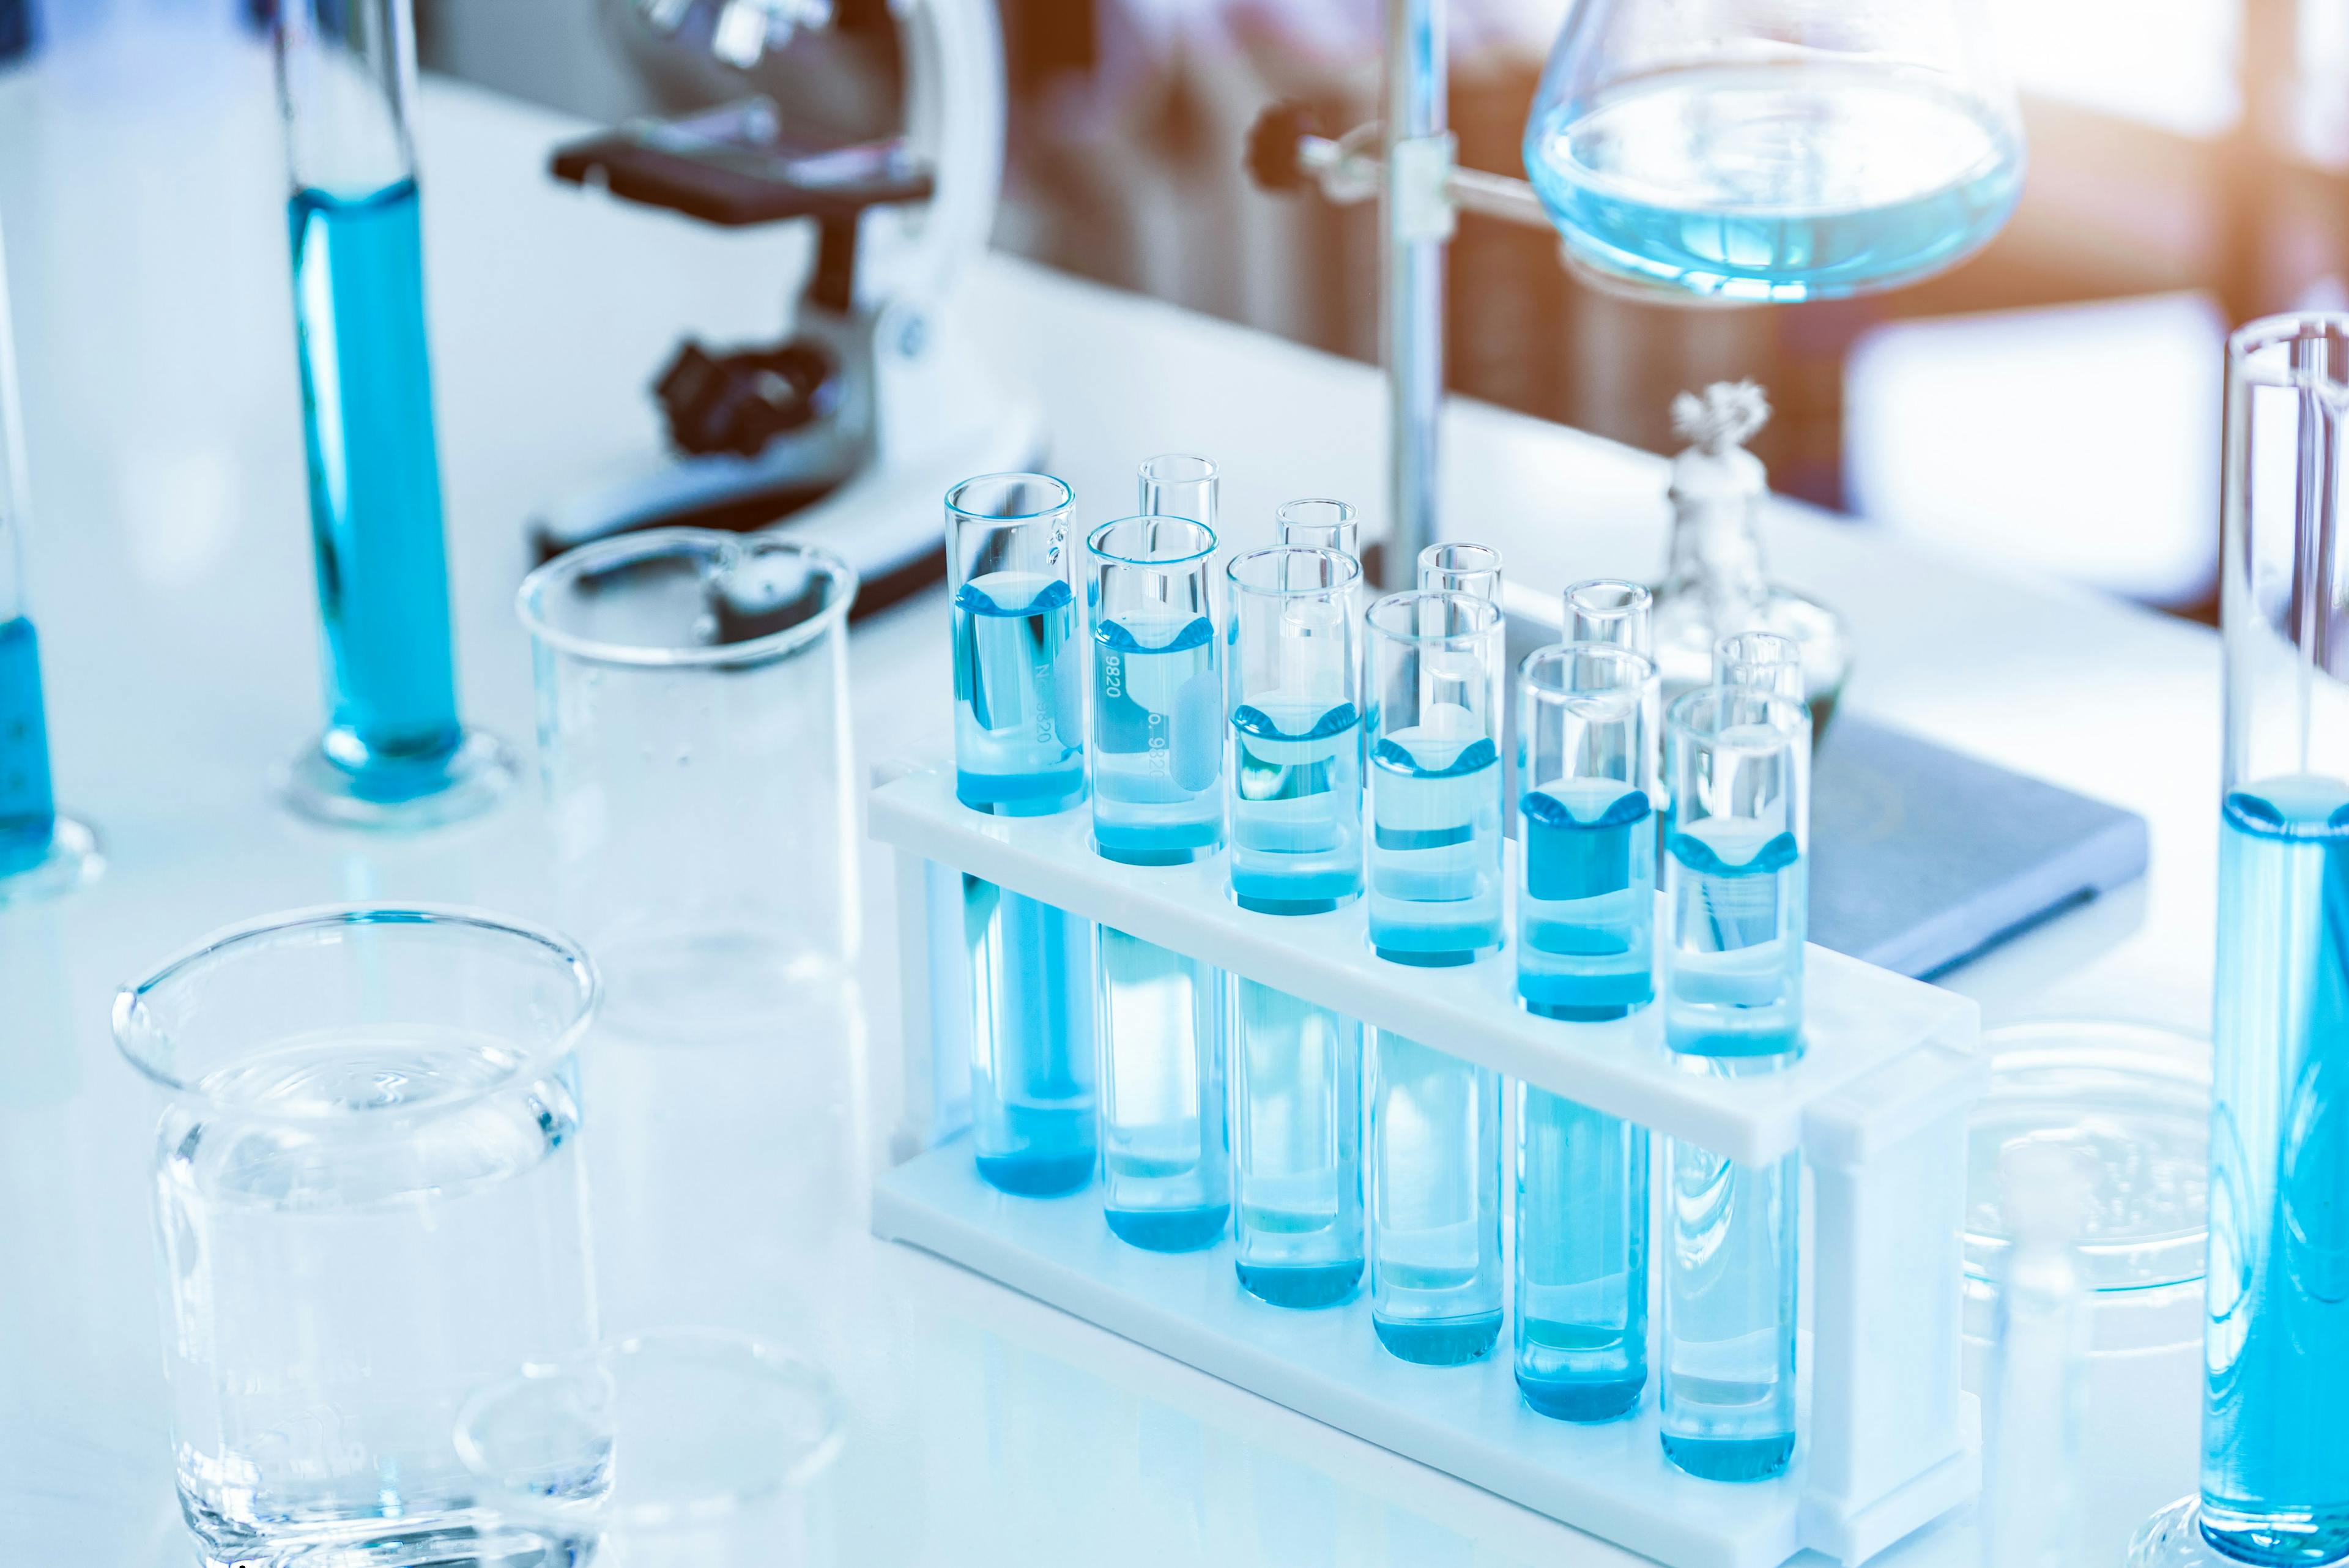 USP Expert Discusses Concerns on Biosimilar Safety and Efficacy Through Quality Standards